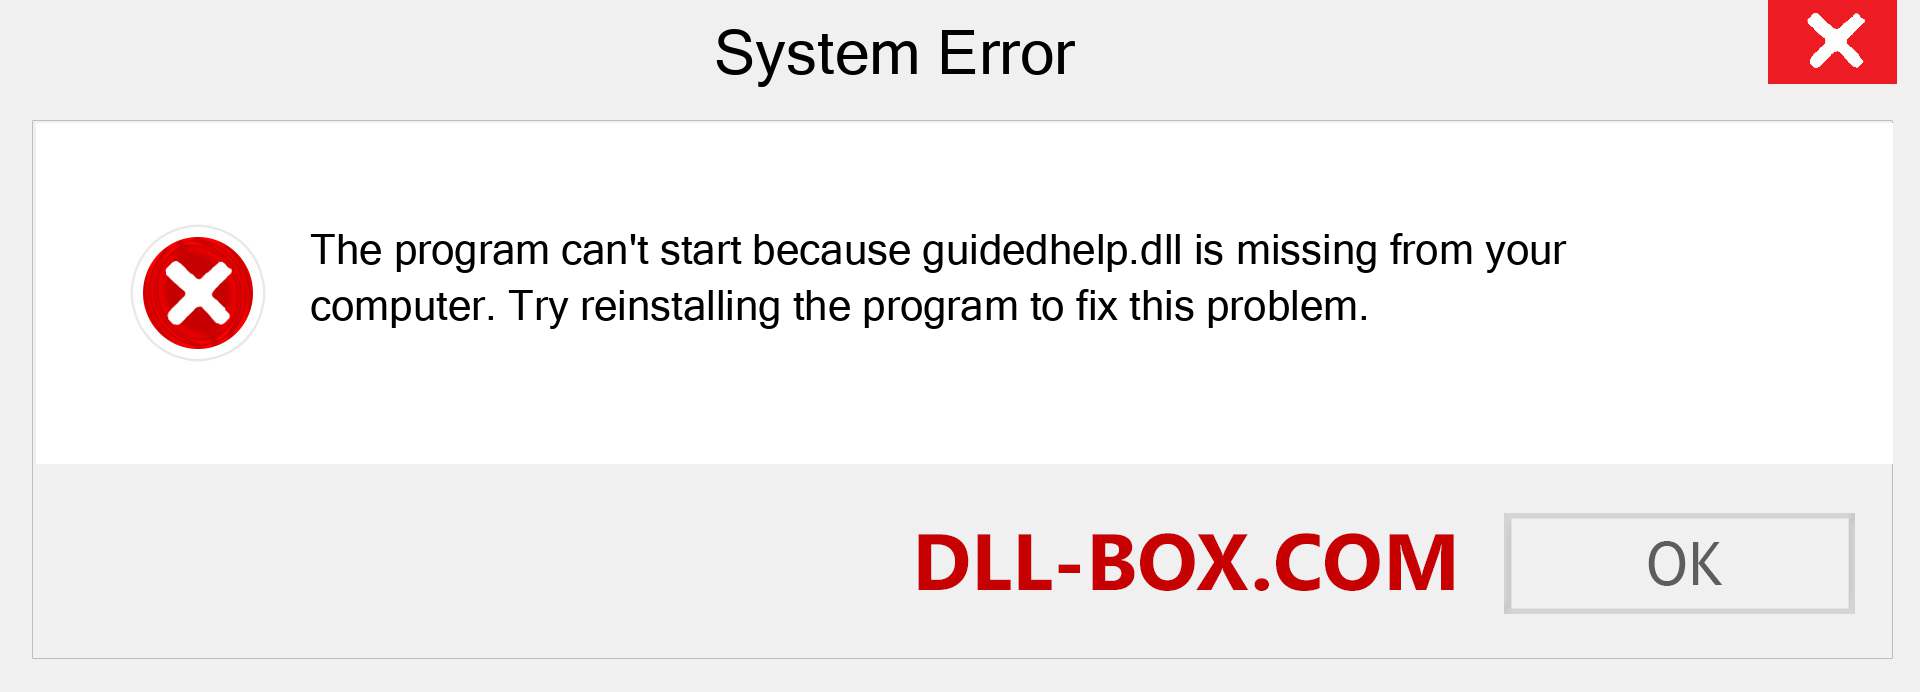  guidedhelp.dll file is missing?. Download for Windows 7, 8, 10 - Fix  guidedhelp dll Missing Error on Windows, photos, images